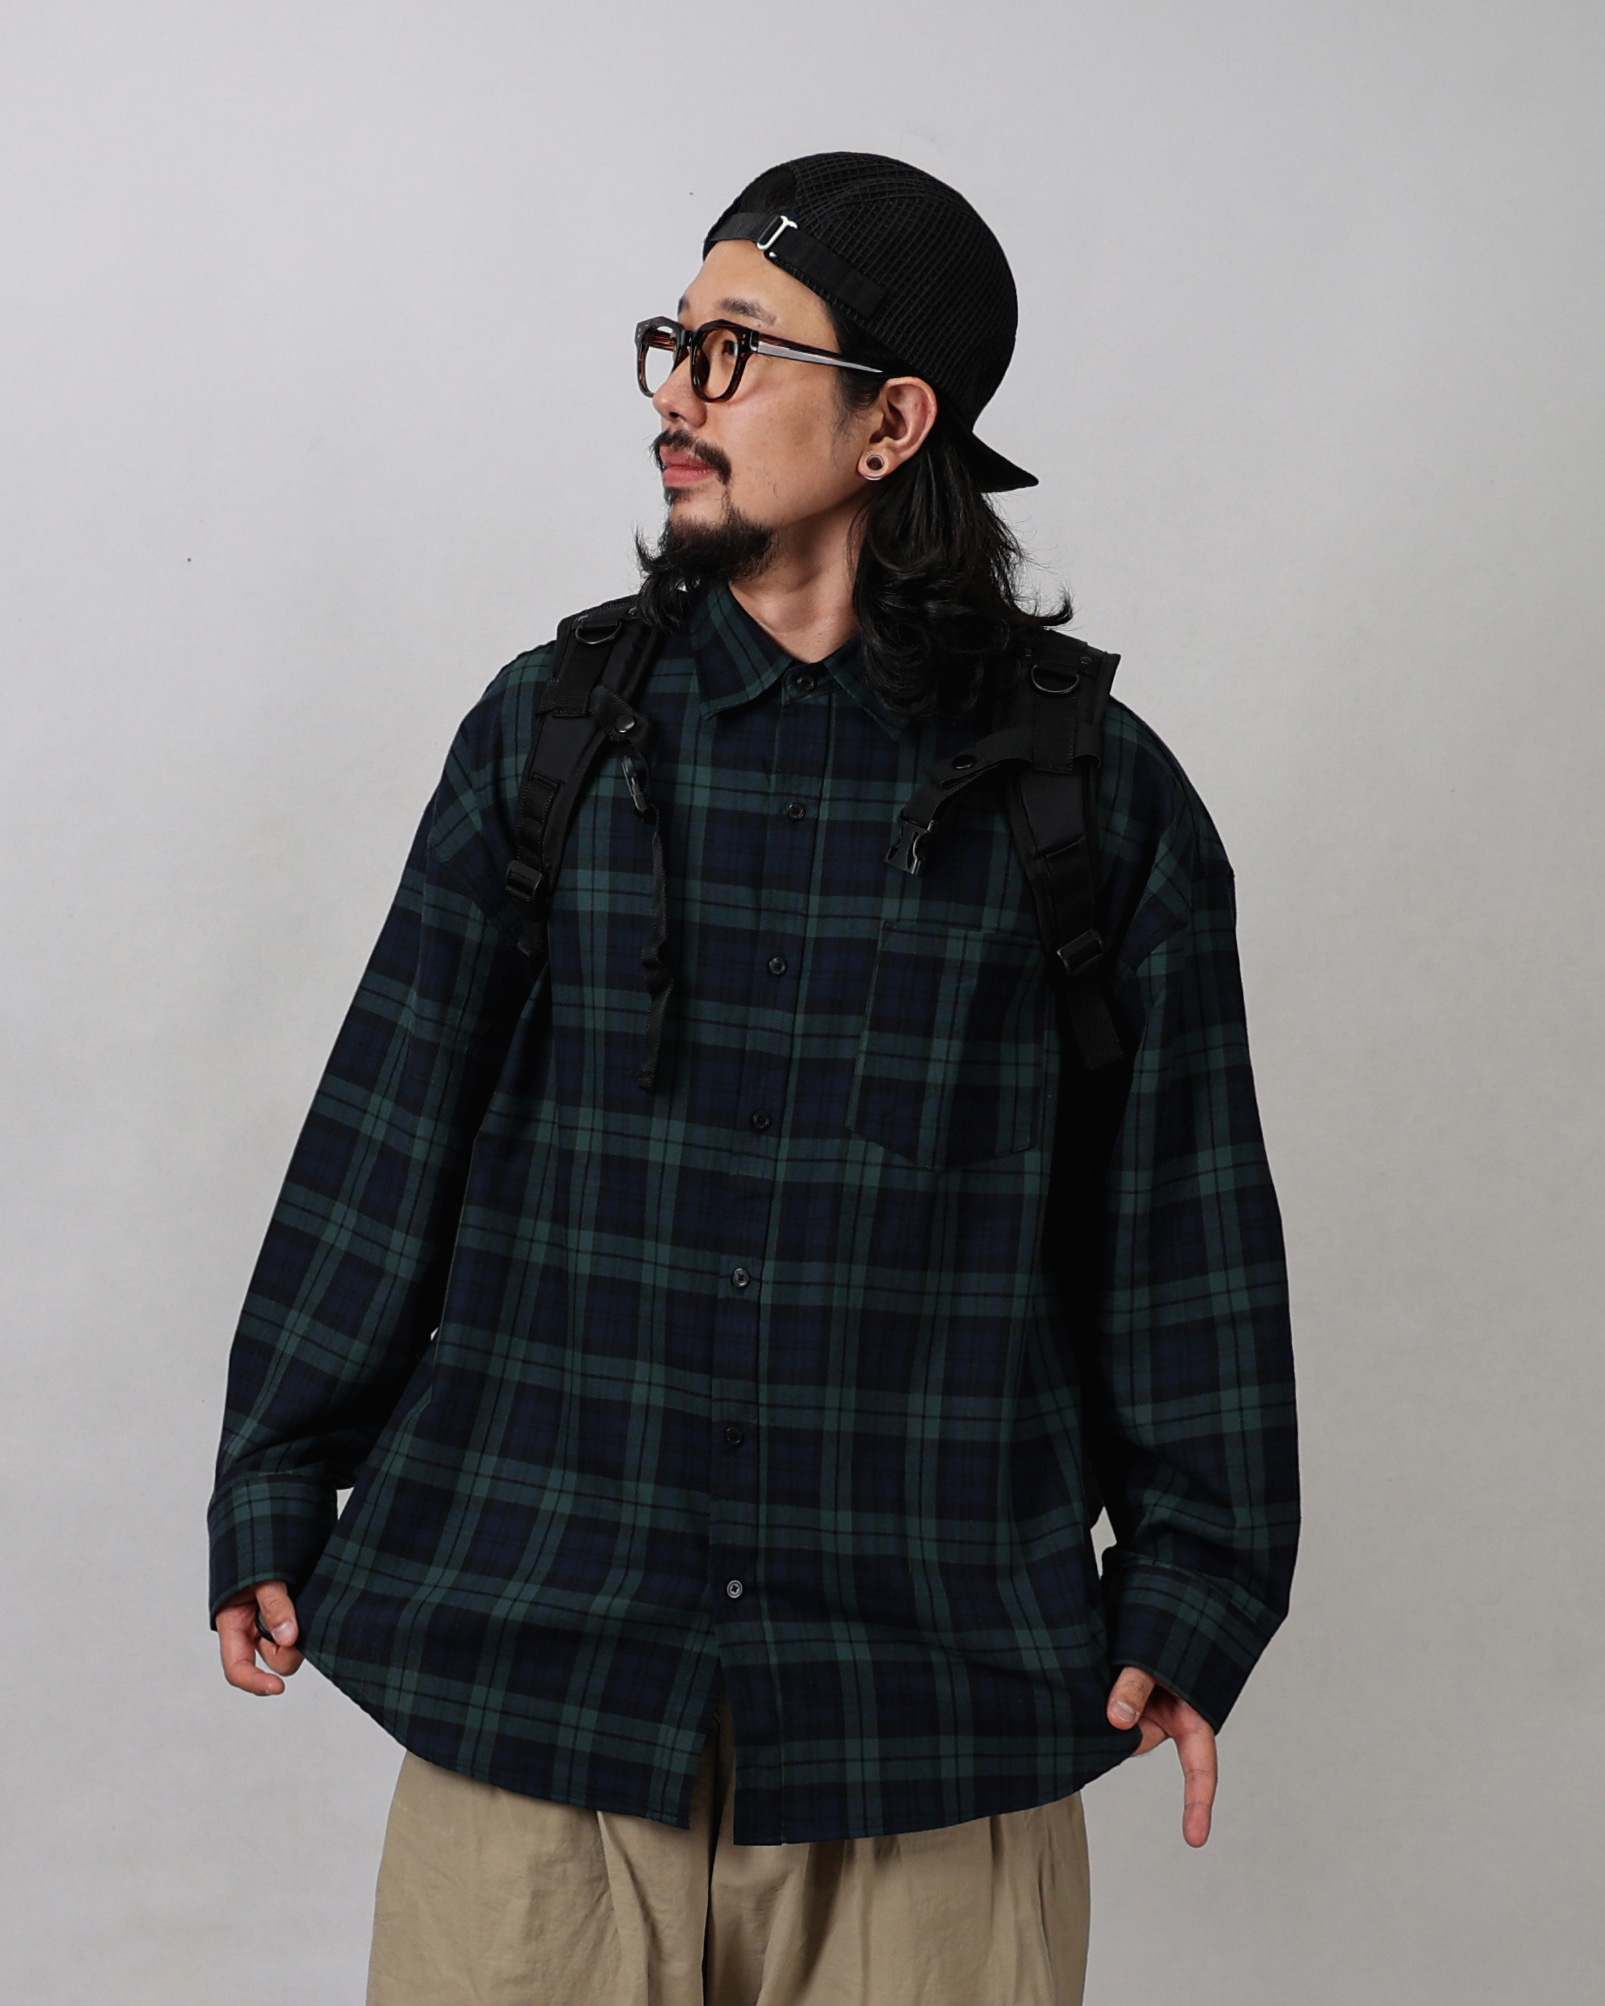 OTHER 355 Classy Check Over Shirts (Red/Green)